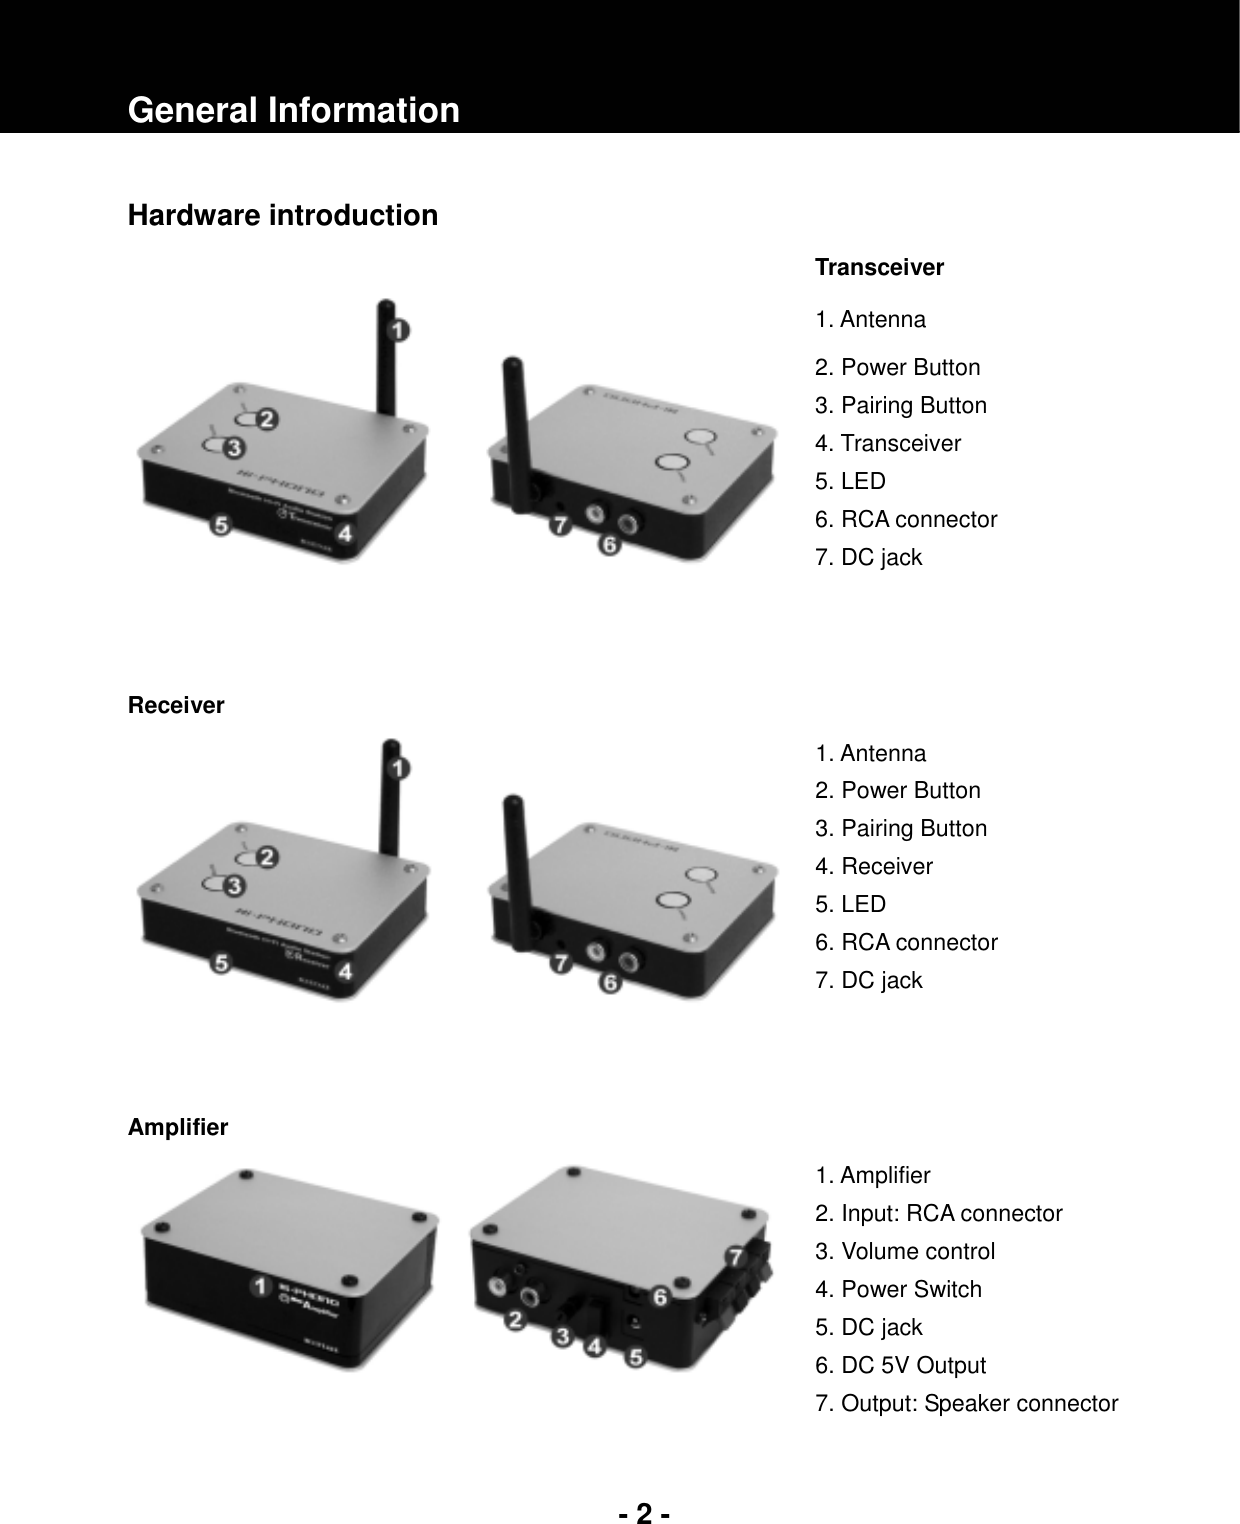 - 2 -General Information Hardware introduction Transceiver 1. Antenna 2. Power Button 3. Pairing Button4. Transceiver 5. LED 6. RCA connector 7. DC jack Receiver 1. Antenna 2. Power Button 3. Pairing Button 4. Receiver 5. LED 6. RCA connector 7. DC jack Amplifier 1. Amplifier 2. Input: RCA connector 3. Volume control 4. Power Switch   5. DC jack 6. DC 5V Output 7. Output: Speaker connector 